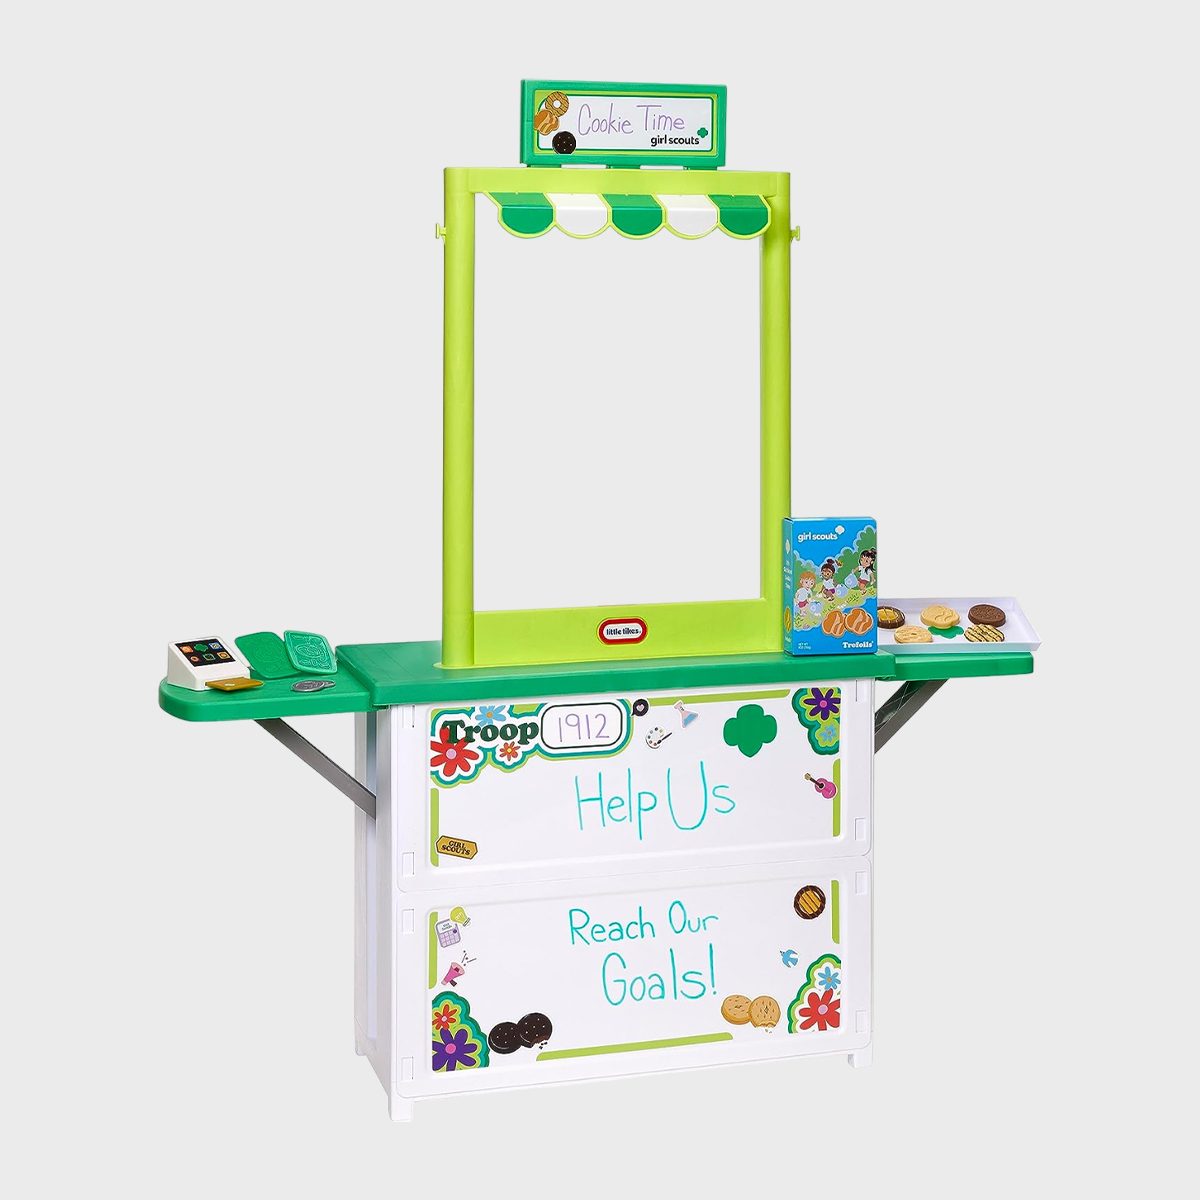 <p>Encourage your youngest scouts to explore entrepreneurship and build confidence by setting up their very own <a href="https://www.amazon.com/Little-Tikes-Scouts-Cookie-Booth/dp/B0BN57SGNB" rel="noopener noreferrer">cookie booth</a>. This booth comes with 18 accessories, so kids can pretend to sell <a href="https://www.rd.com/list/surprising-secrets-girl-scout-cookies/" rel="noopener noreferrer">Girl Scout cookies</a> and imagine running their own business. And if they're ready to get out there, they can set up shop and sell the real deal. We'll take a box of Thin Mints, please!</p> <p class="listicle-page__cta-button-shop"><a class="shop-btn" href="https://www.amazon.com/Little-Tikes-Scouts-Cookie-Booth/dp/B0BN57SGNB/">Shop Now</a></p>